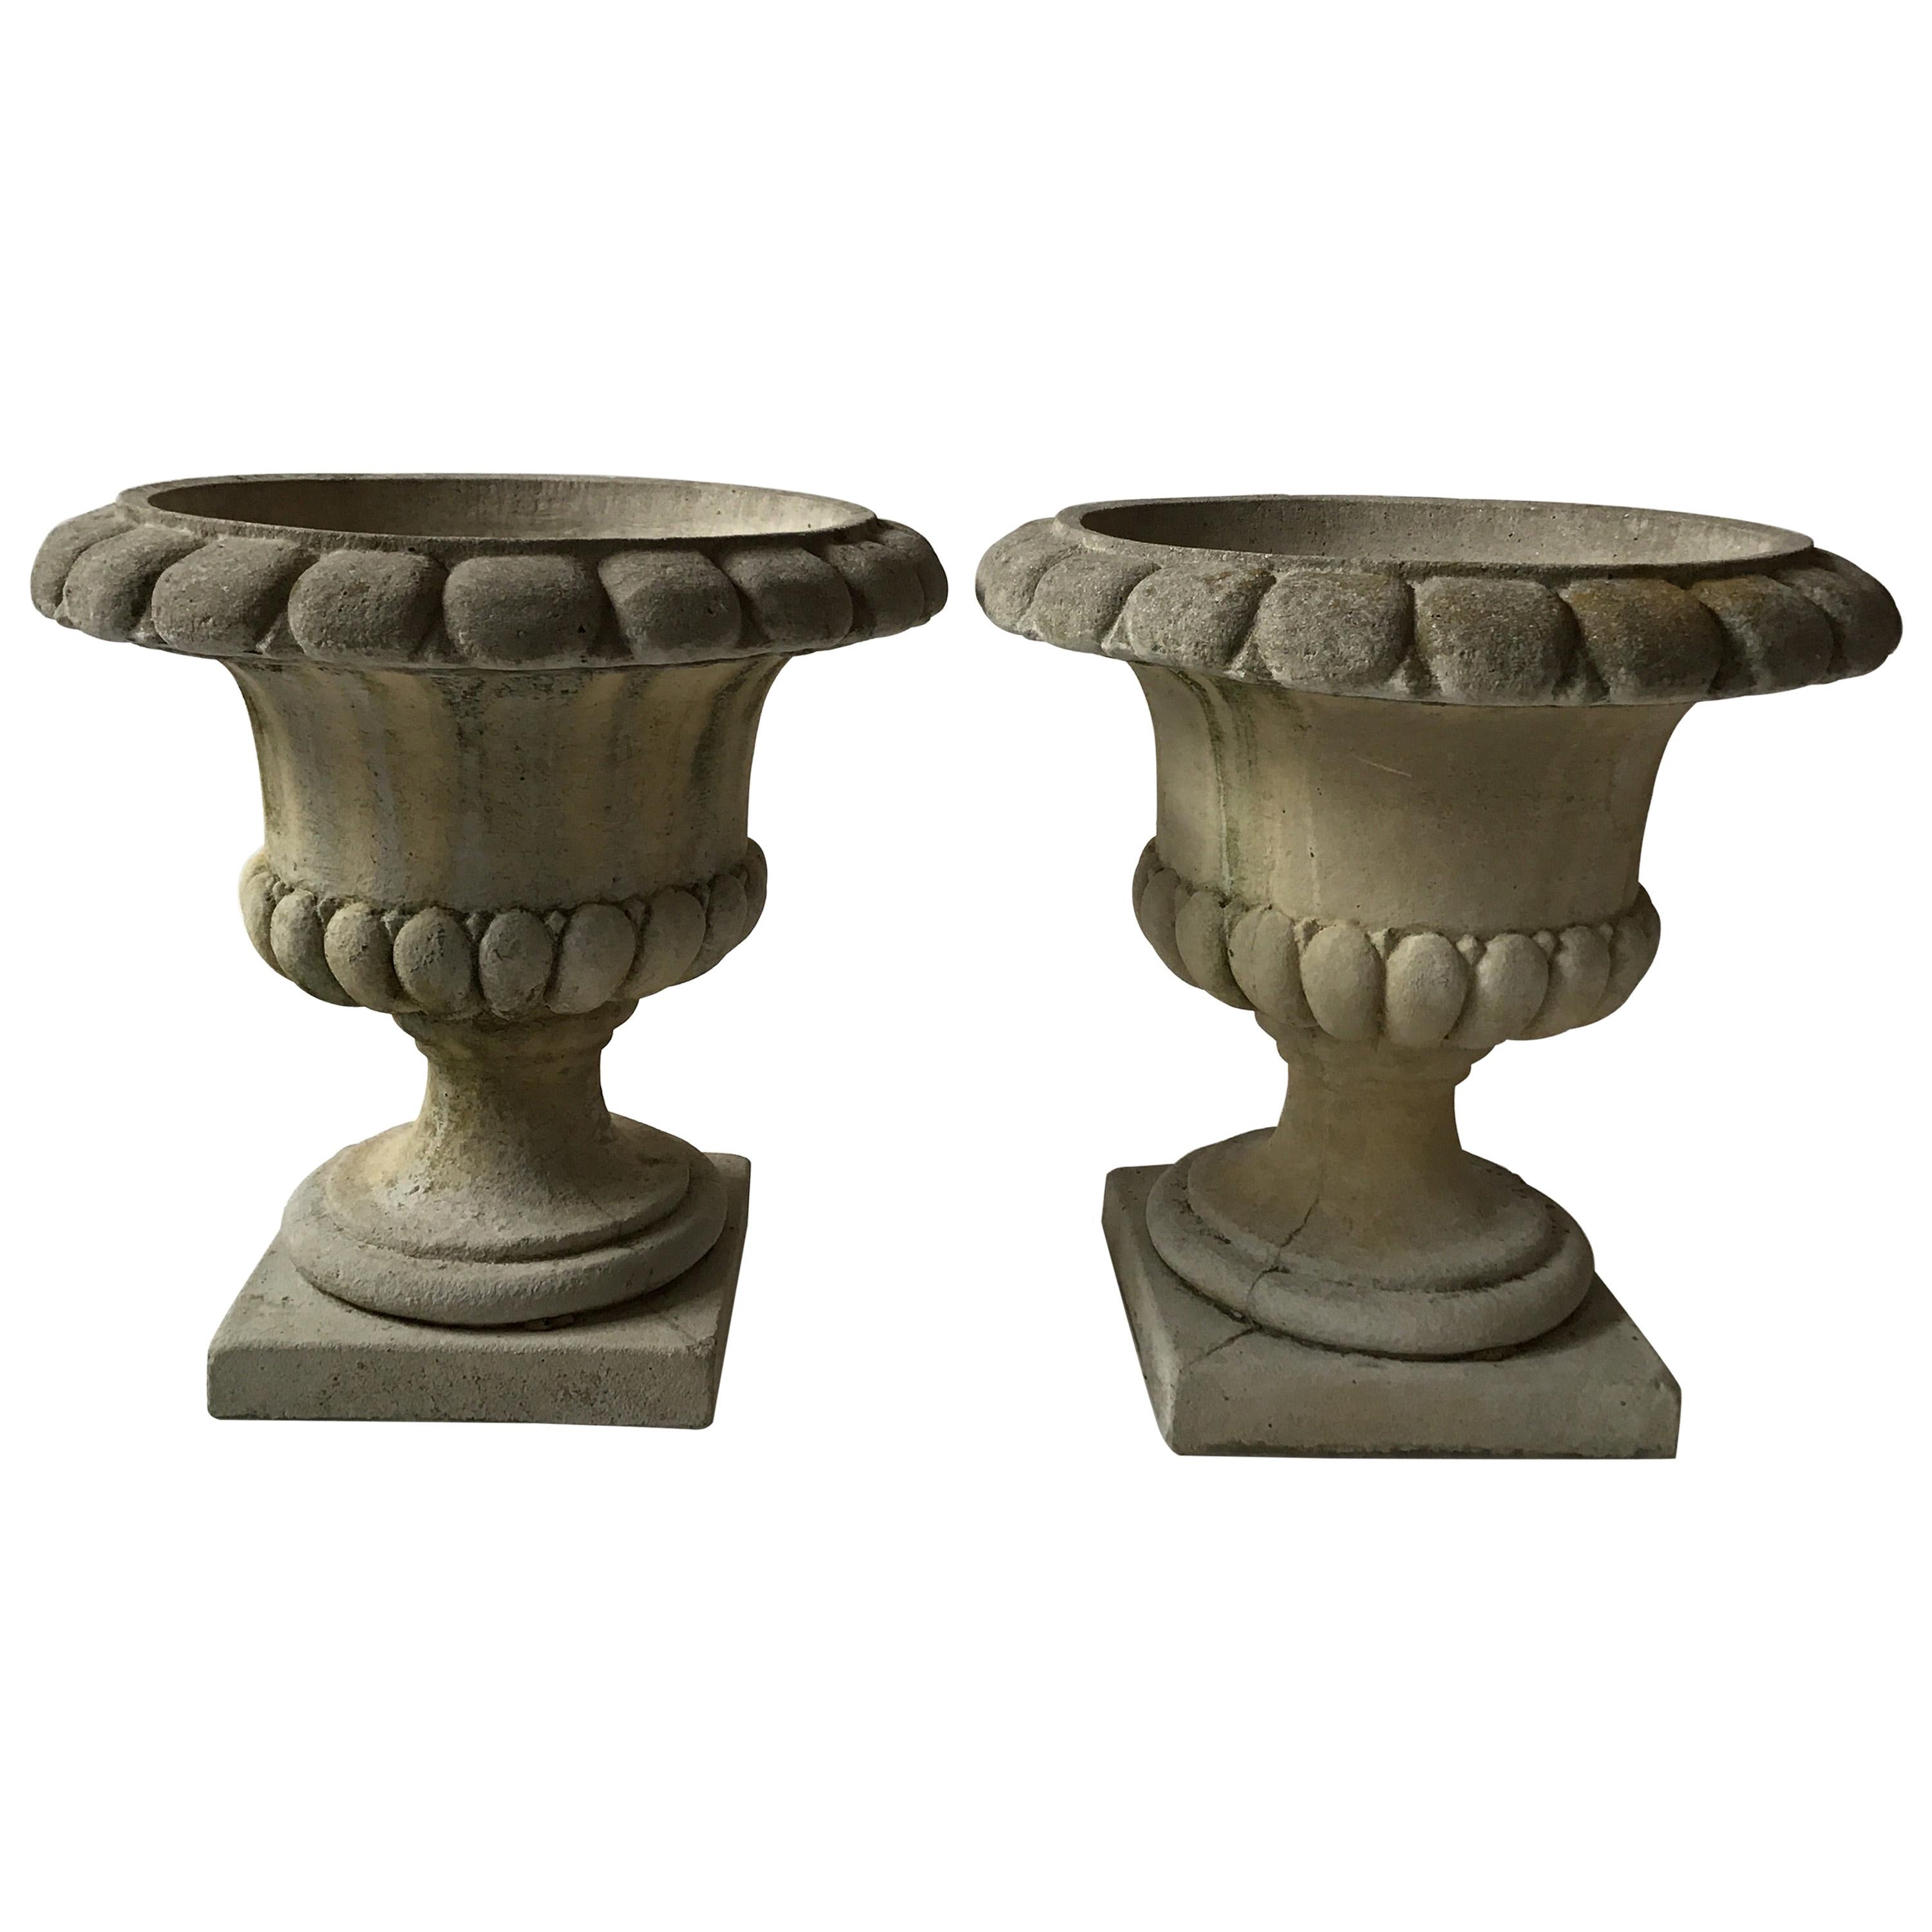 Pair of Concrete Urns by Campania